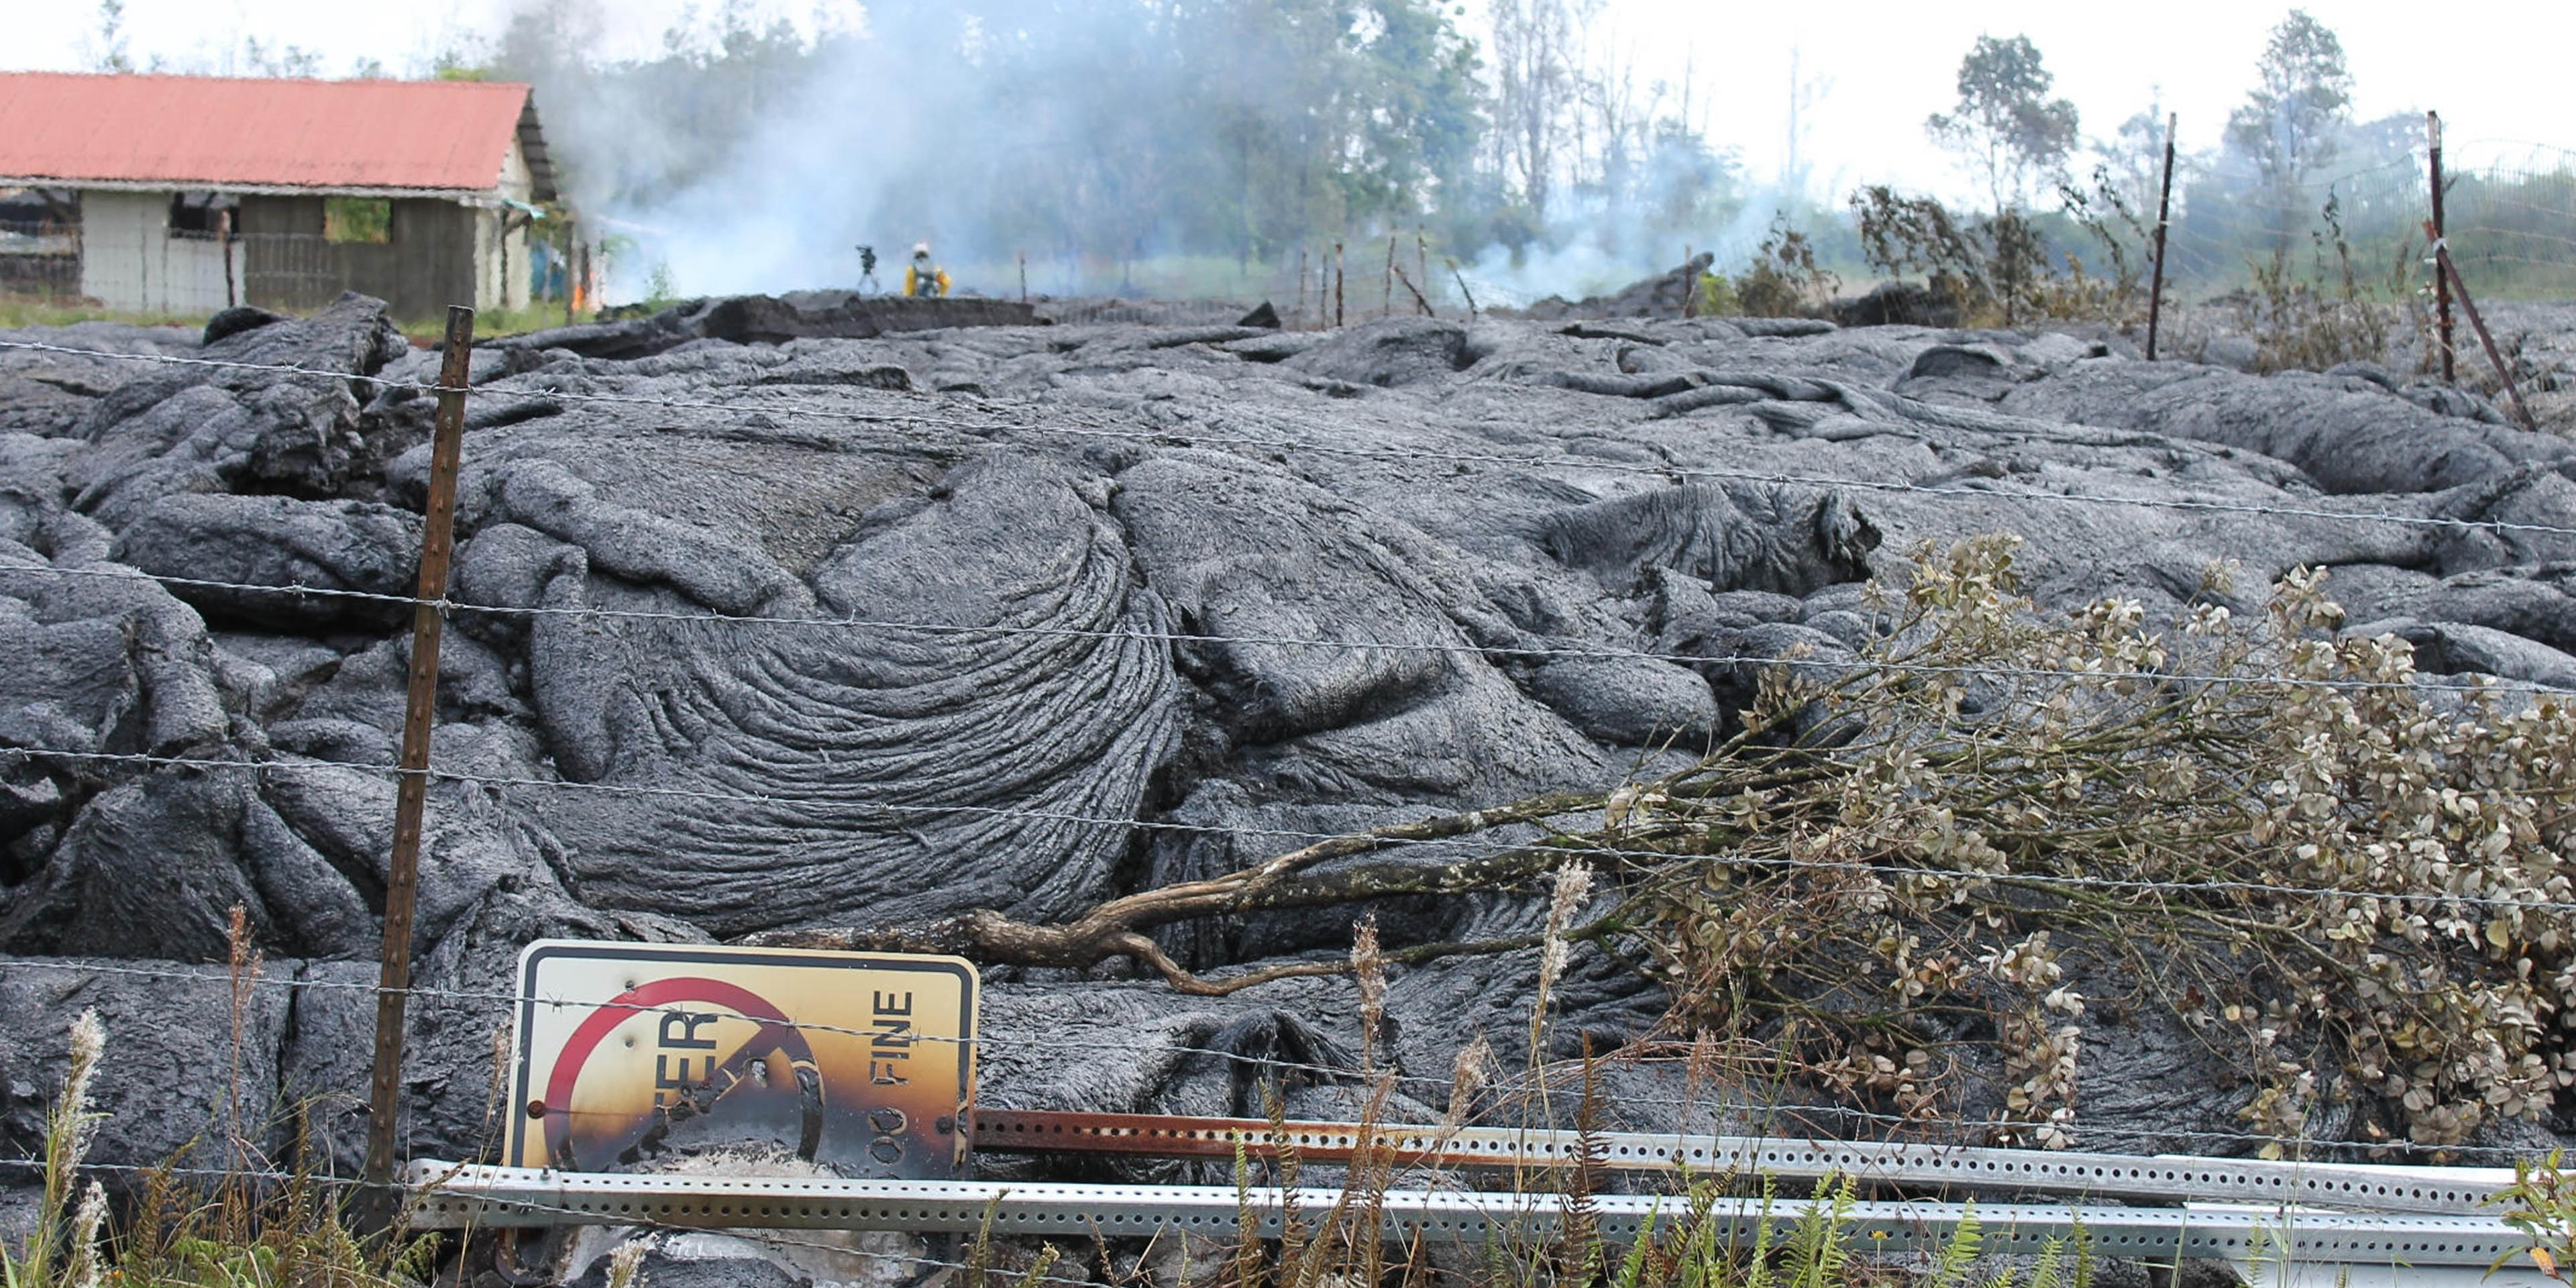 Area of cooling lava flows and burned 'No Litter' sign.